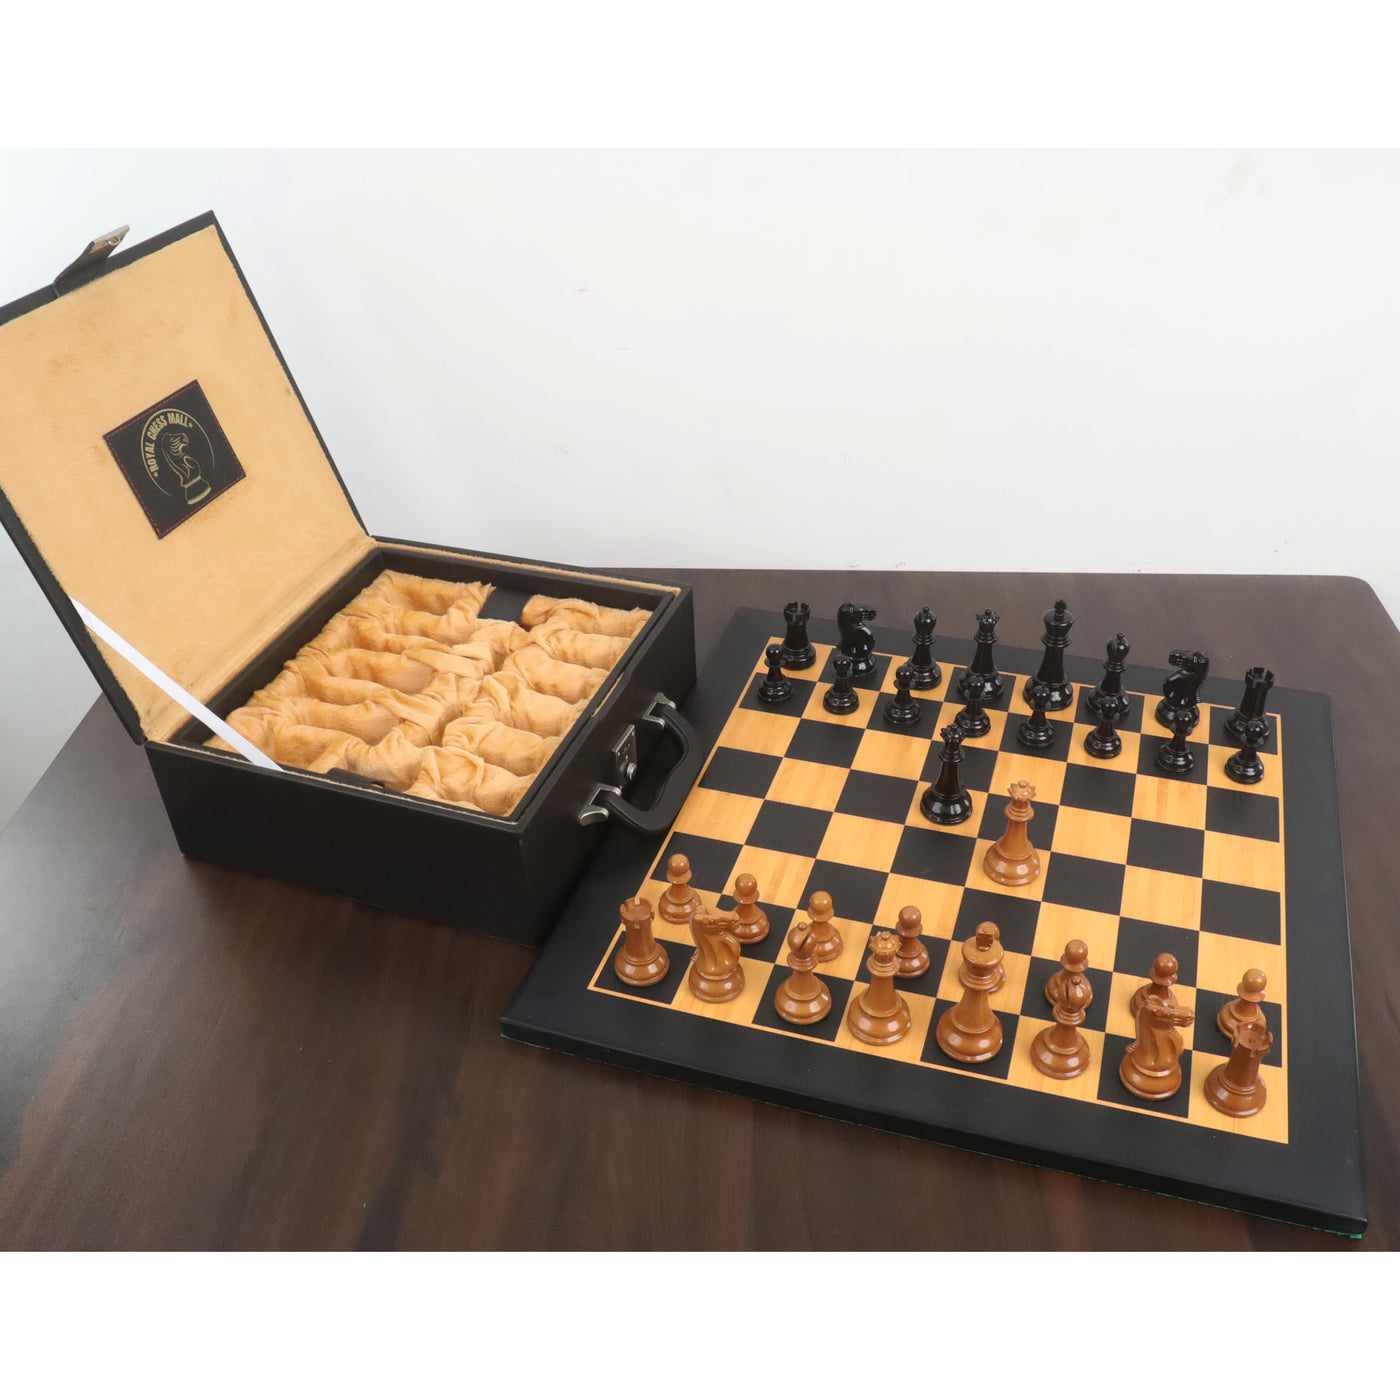 Combo of 3.9" Lessing Staunton Chess Set - Pieces in Natural Ebony Wood & Antiqued Lacquered Boxwood with Board and Box